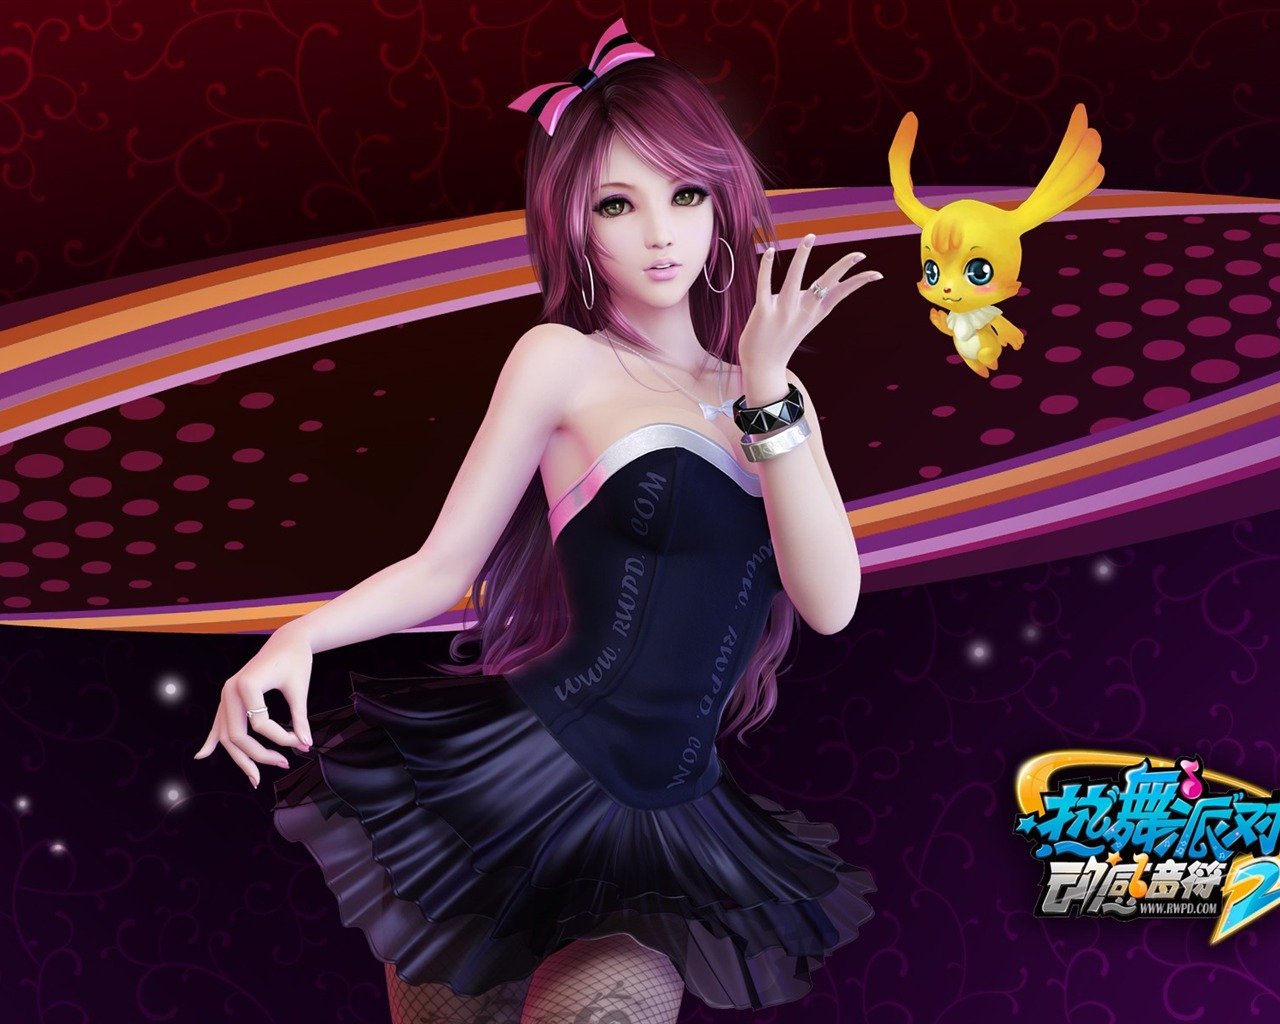 Online game Hot Dance Party II official wallpapers #28 - 1280x1024